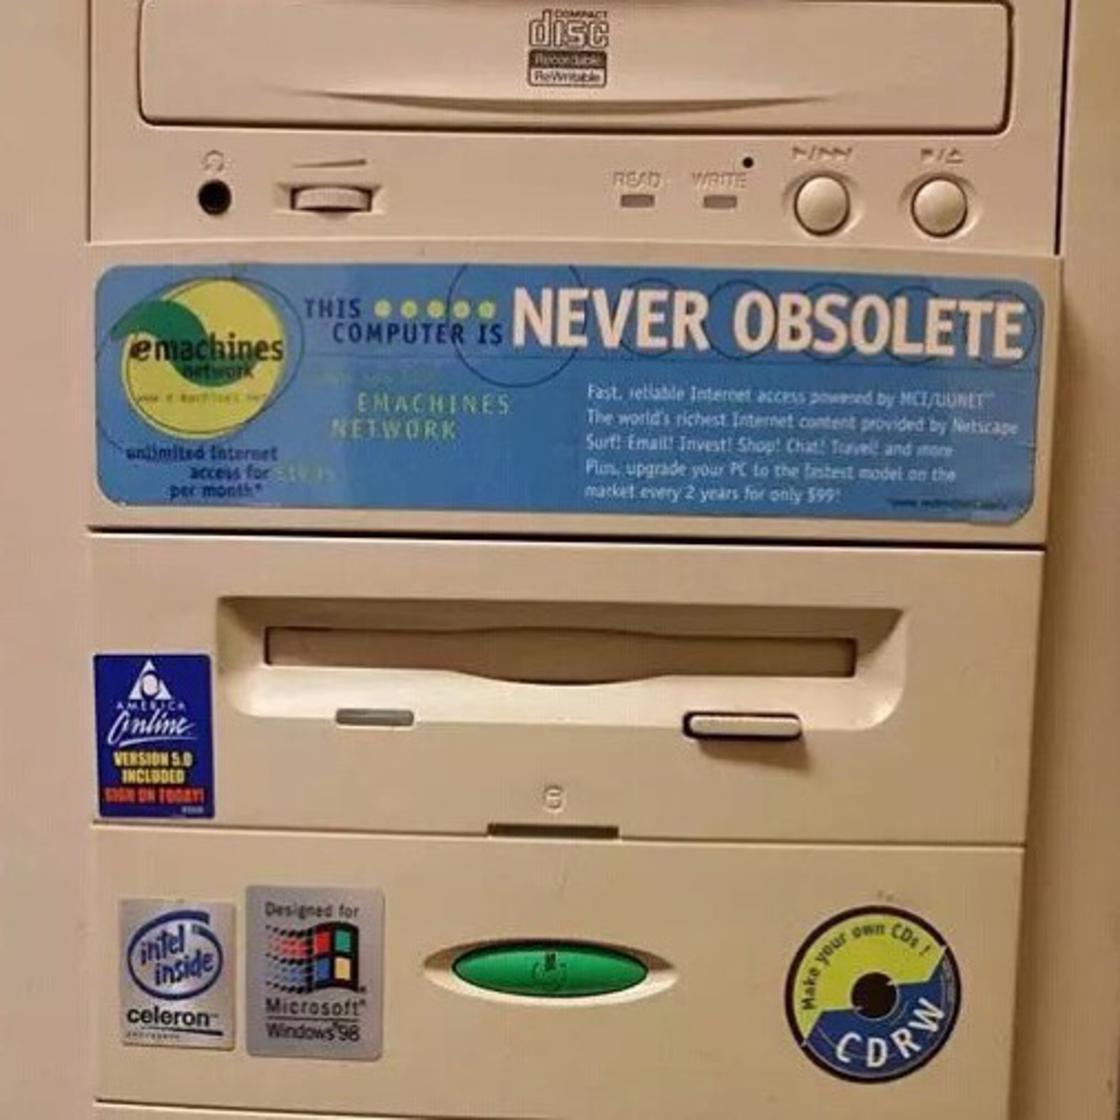 computer is never obsolete - This eco Computer Is The Mputer Is Never Obsolete emachines Emachines Rework talletable Internet access e d by MciLunet The world's richest Internet content provided by a Surt nail Jnvest Shoe Ch a n Plus upide you to the test